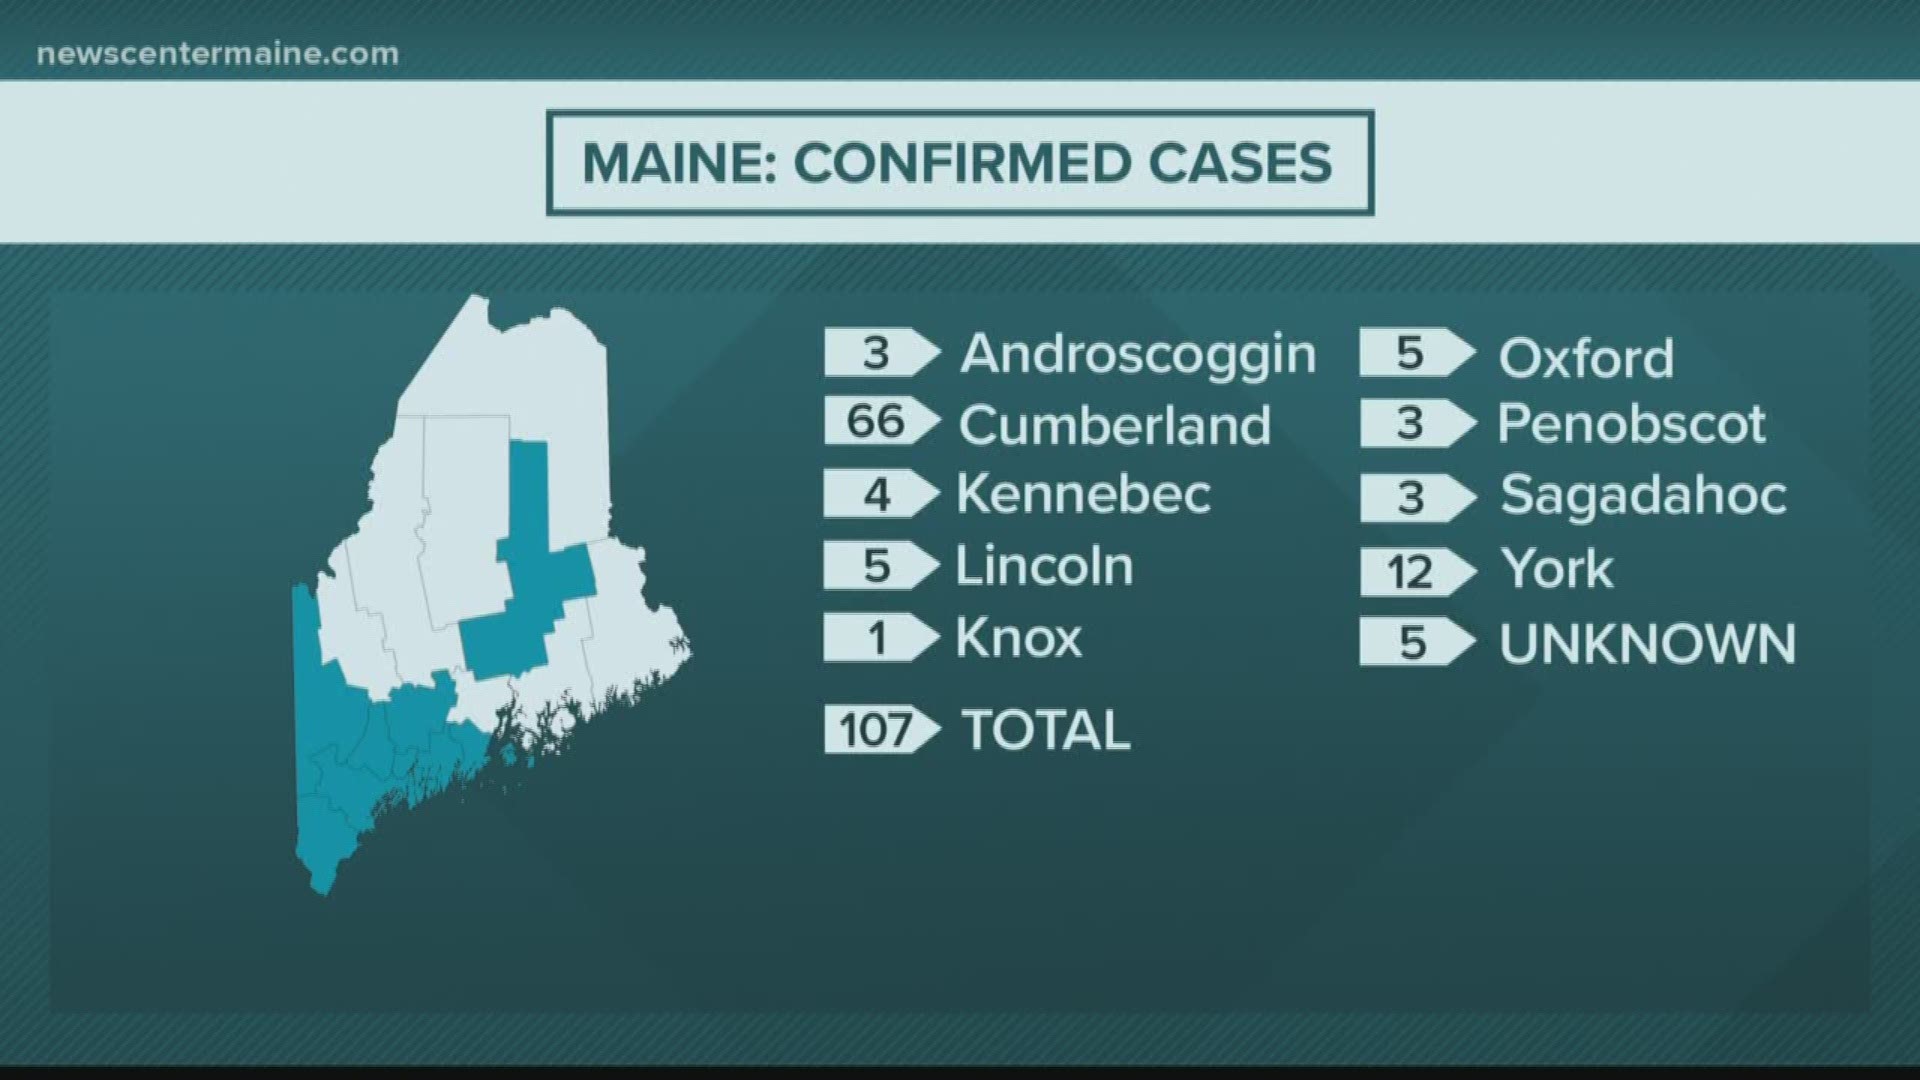 Maine: Confirmed cases of coronavirus, COVID-19 as of March 23, 2020